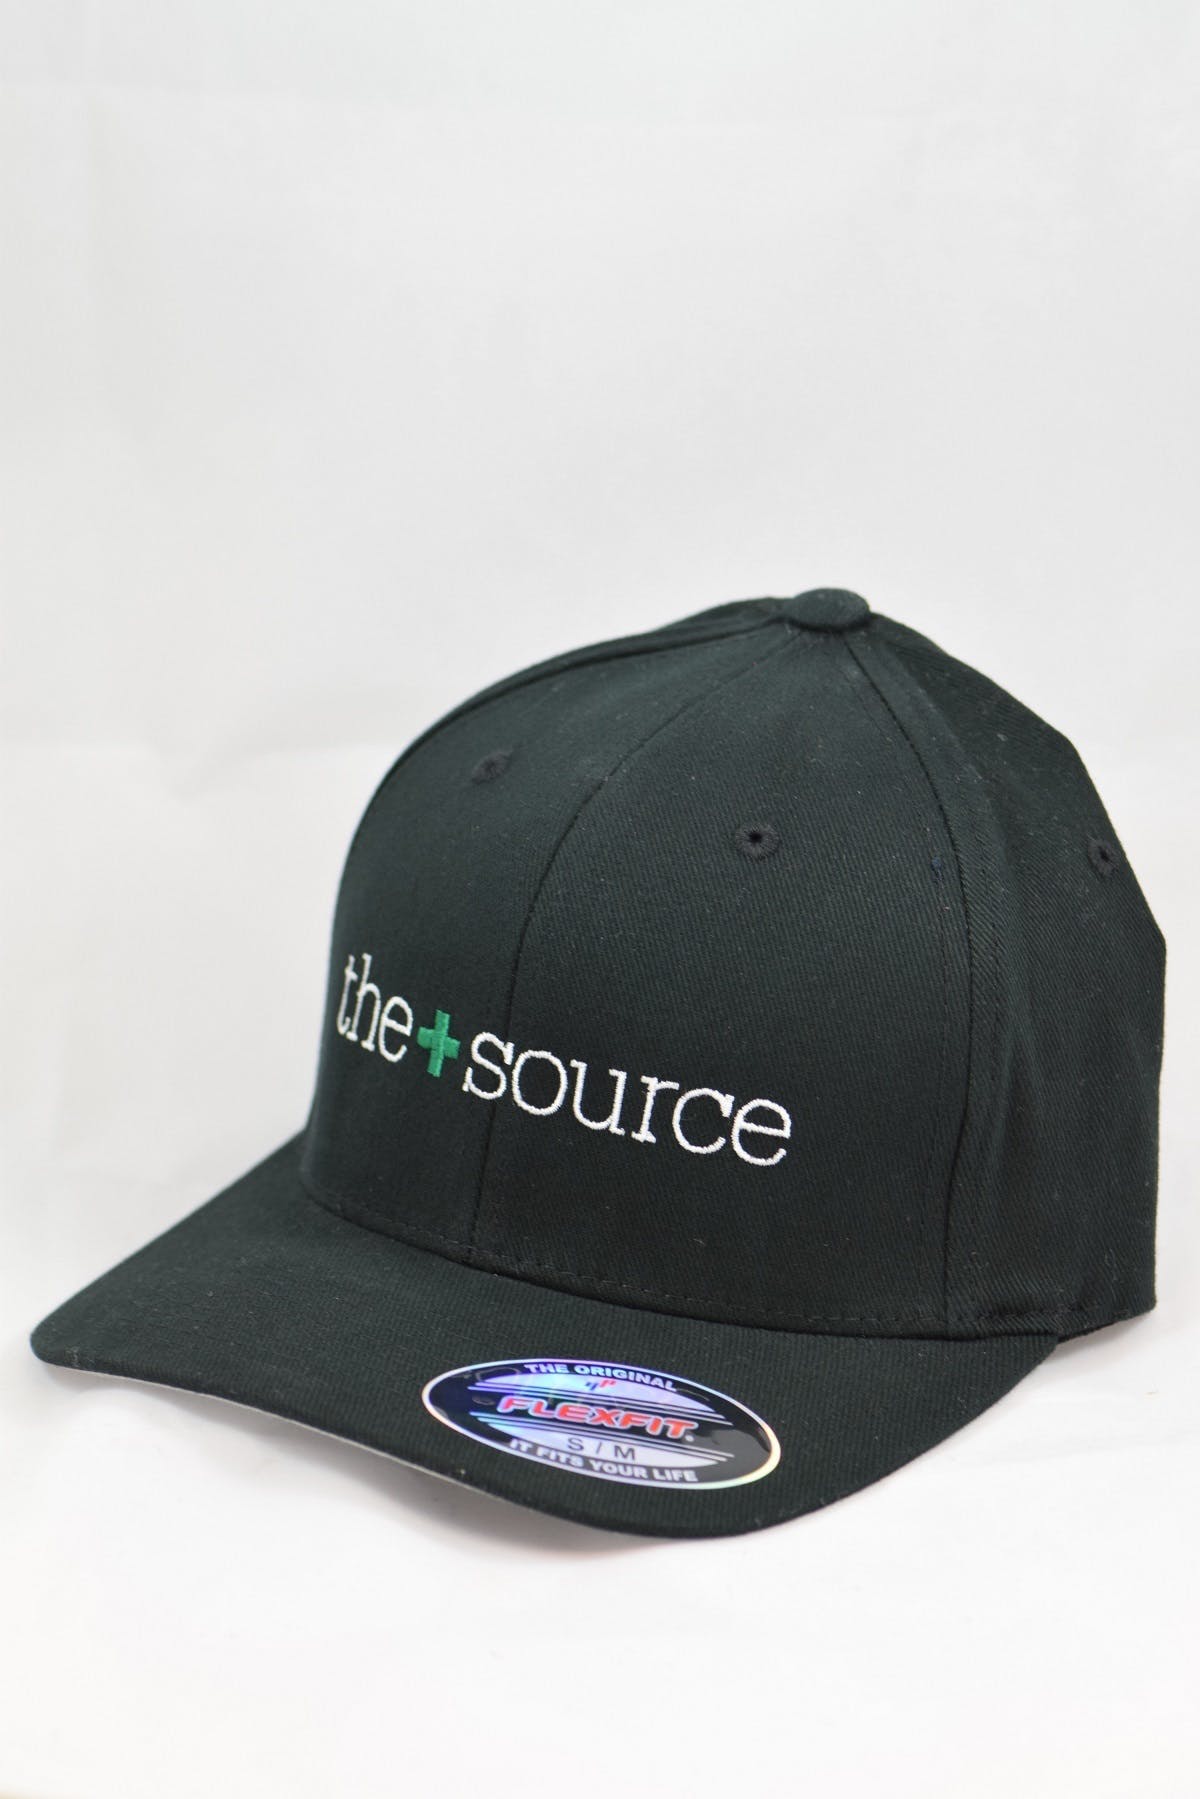 gear-the-2bsource-hat